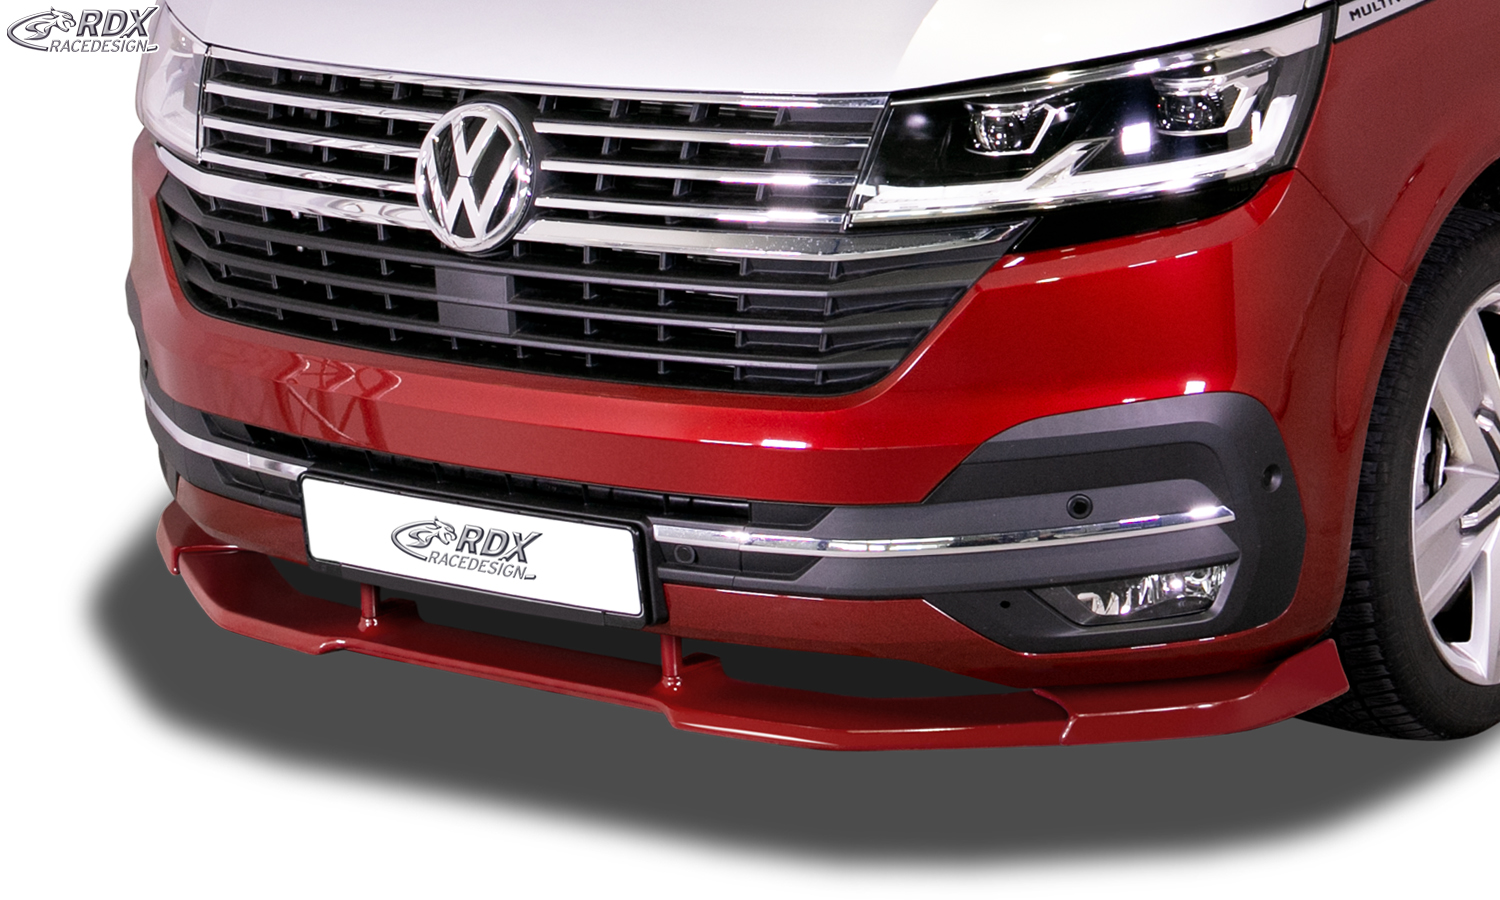 RDFAVX30910 - RDX Front Spoiler VARIO-X for VW T6.1 (for painted